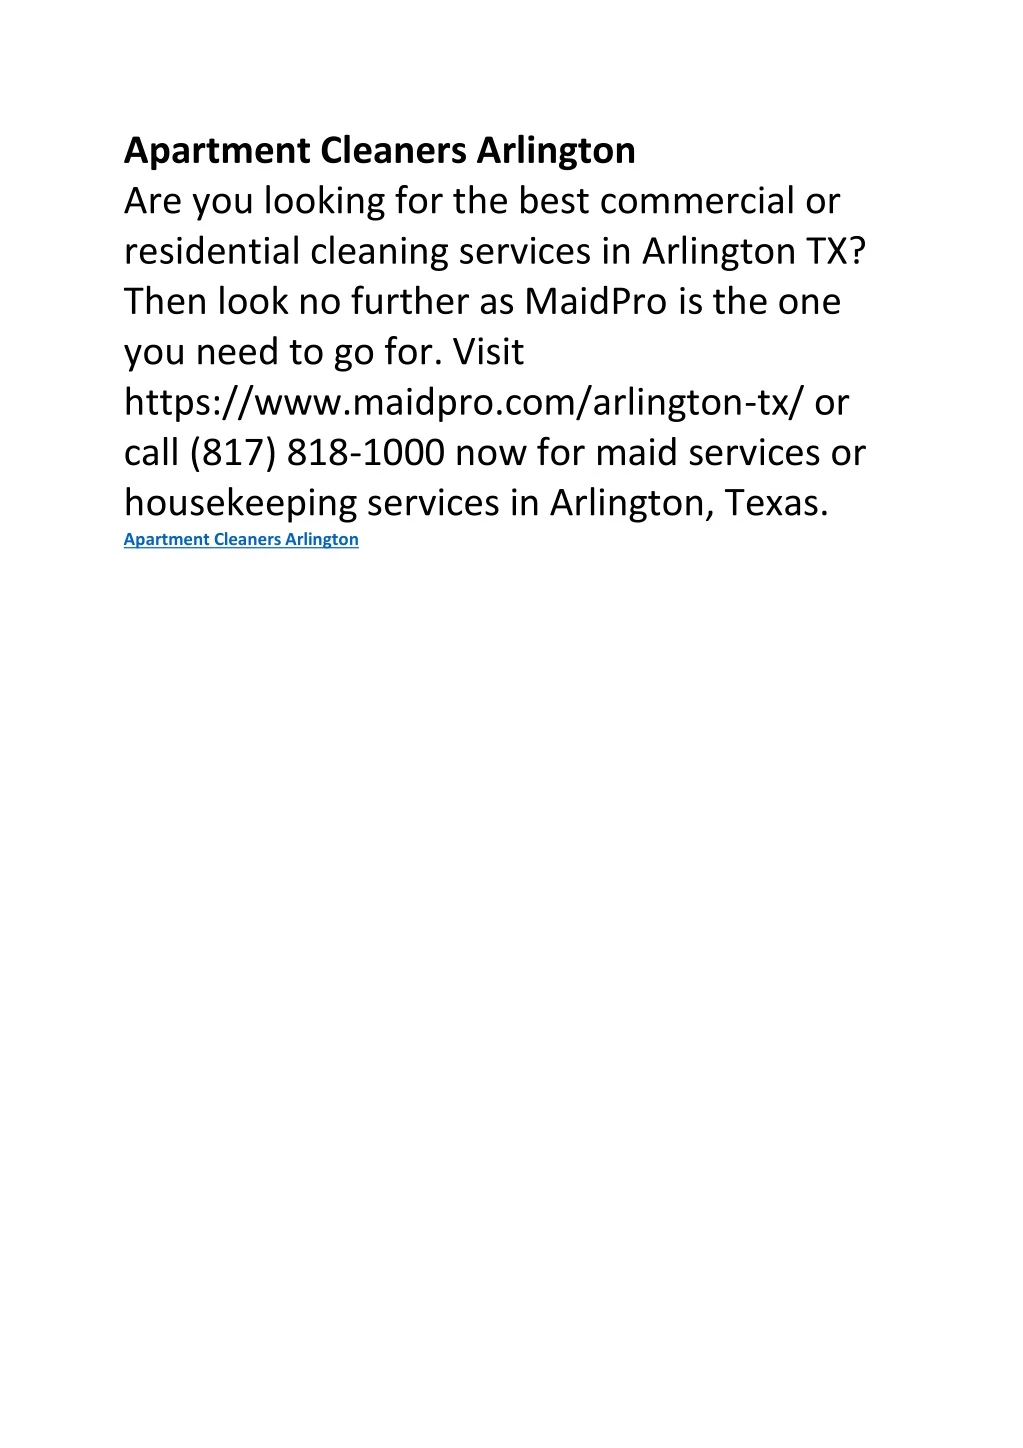 apartment cleaners arlington are you looking